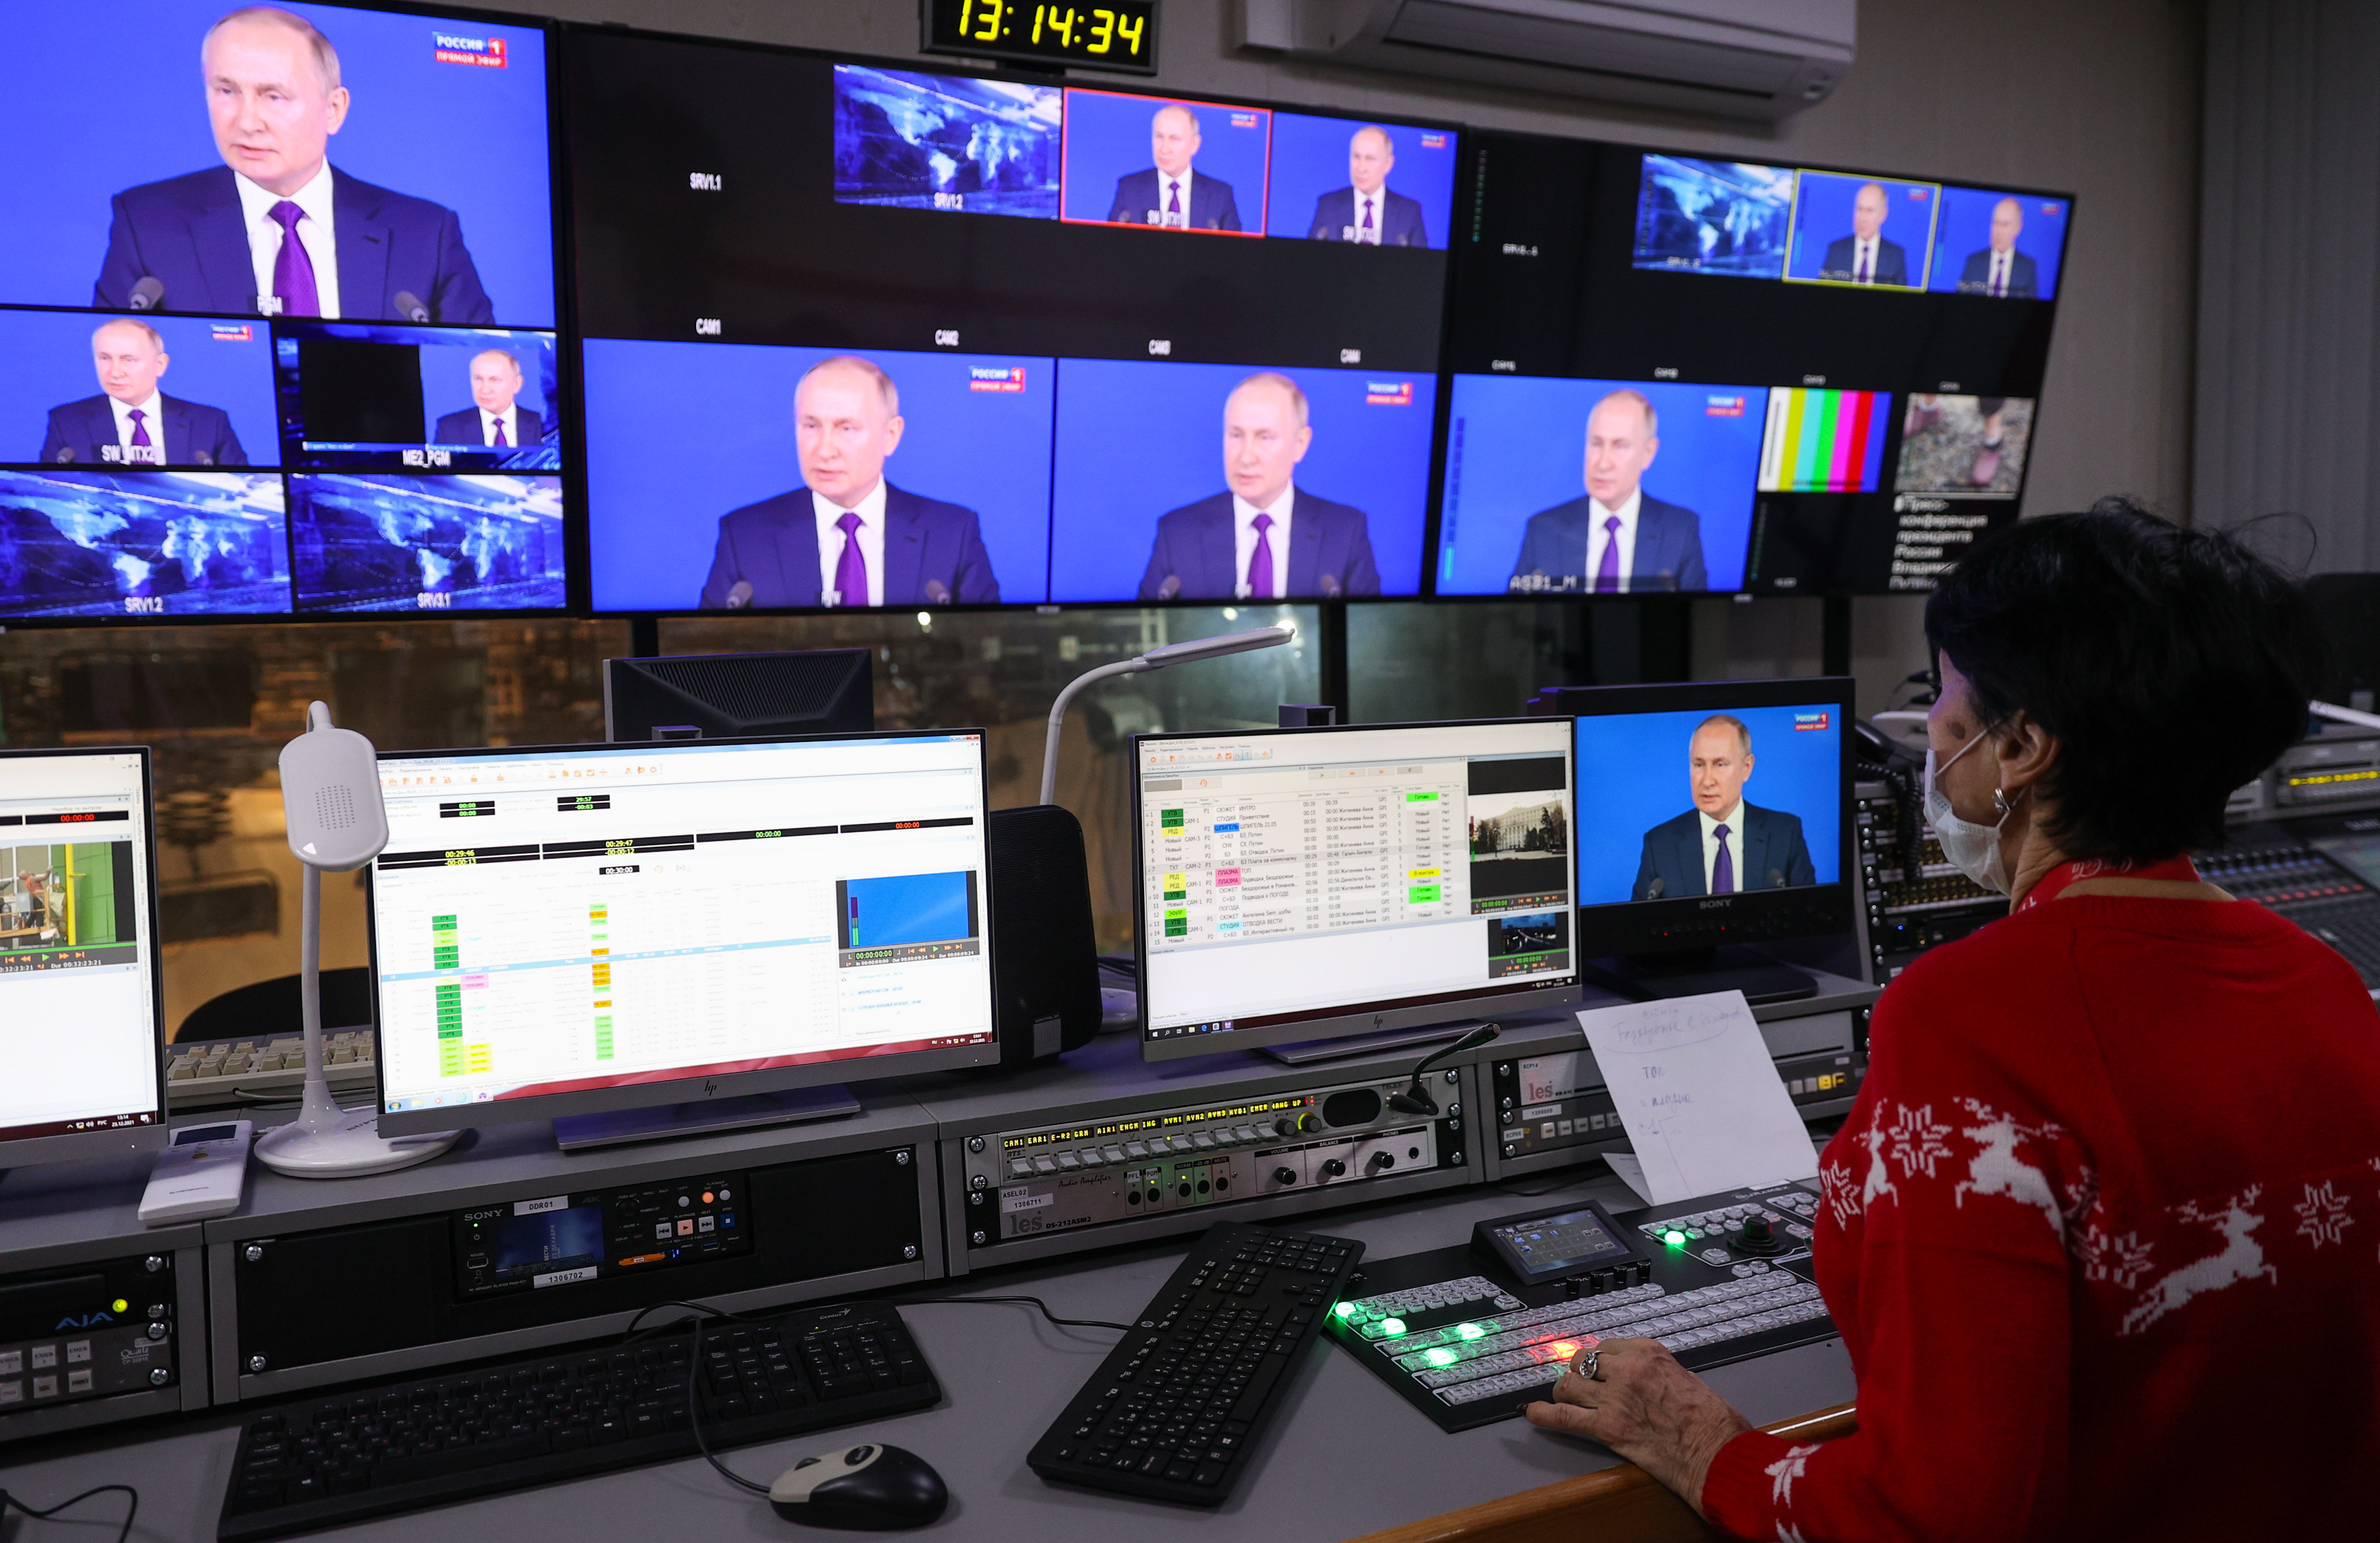 A live broadcast of Russian President Vladimir Putin speaking is shown on Dec. 23, 2021, from a media control room in Russia. 